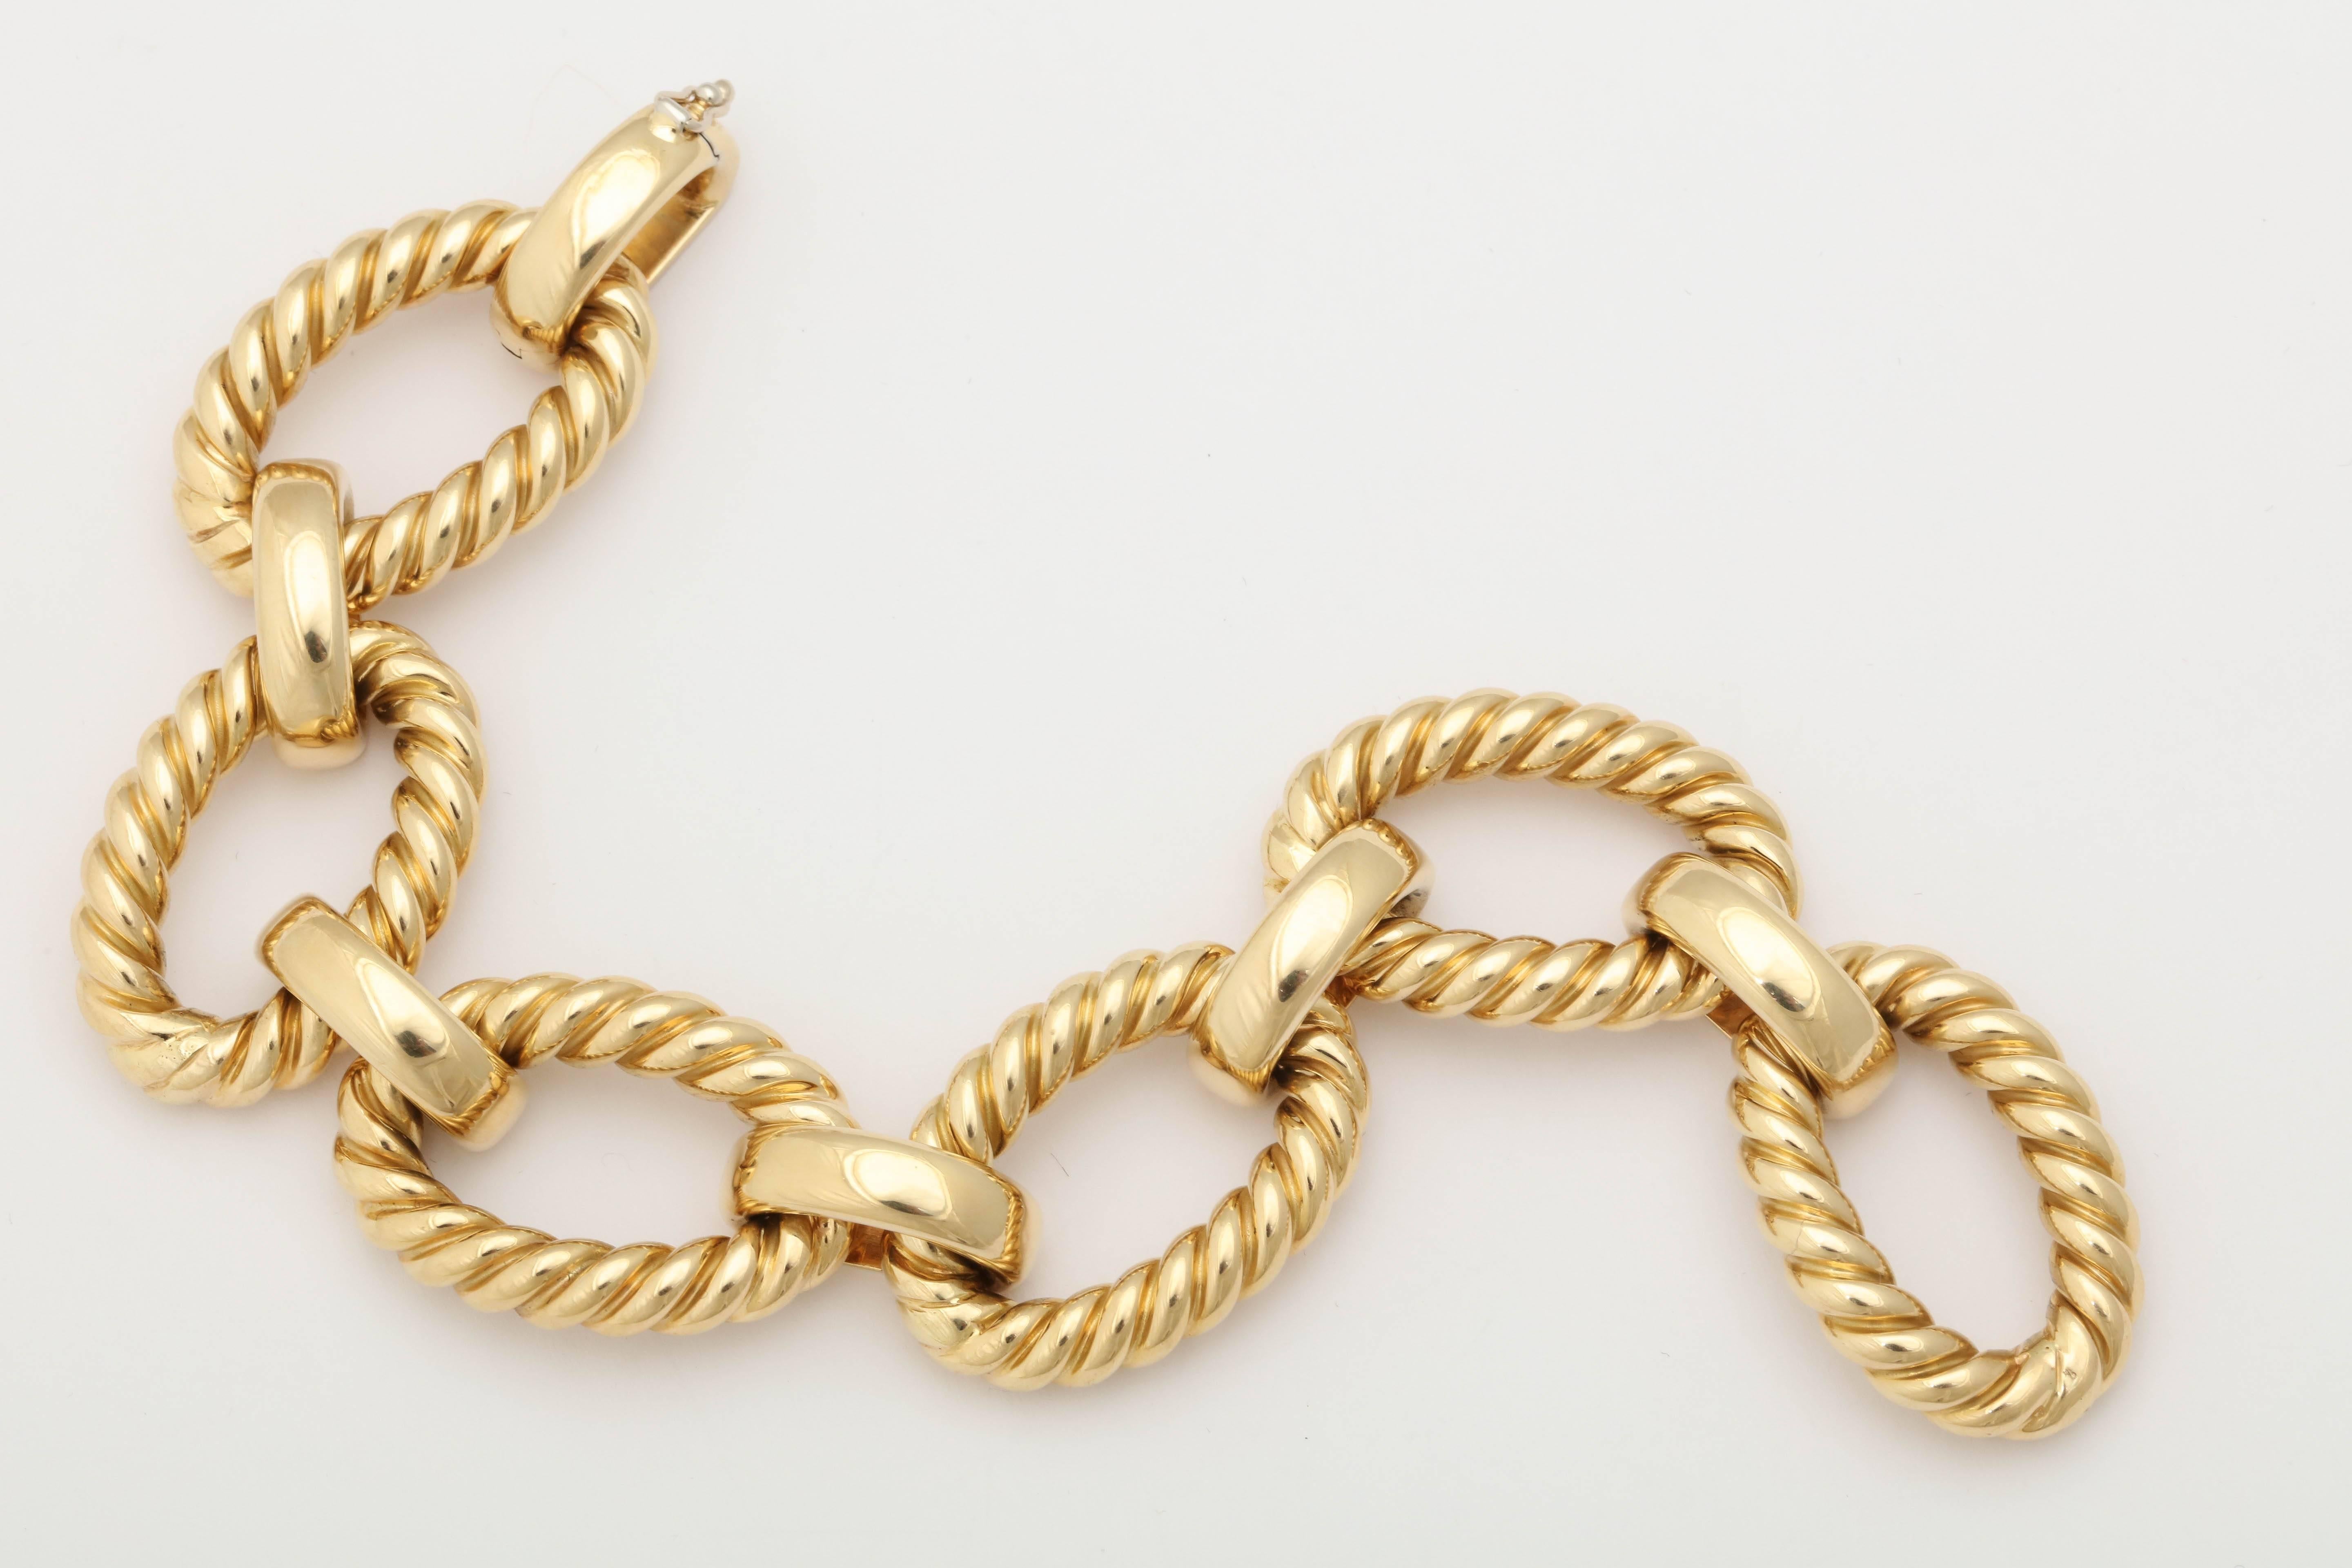 18kt Yellow Gold Two-Textured Oval link flexible bracelet connected by a high polish curved connector pieces and each oval link is made out of a ridged textured twisted gold design. Made in the 1970's in ITALY.